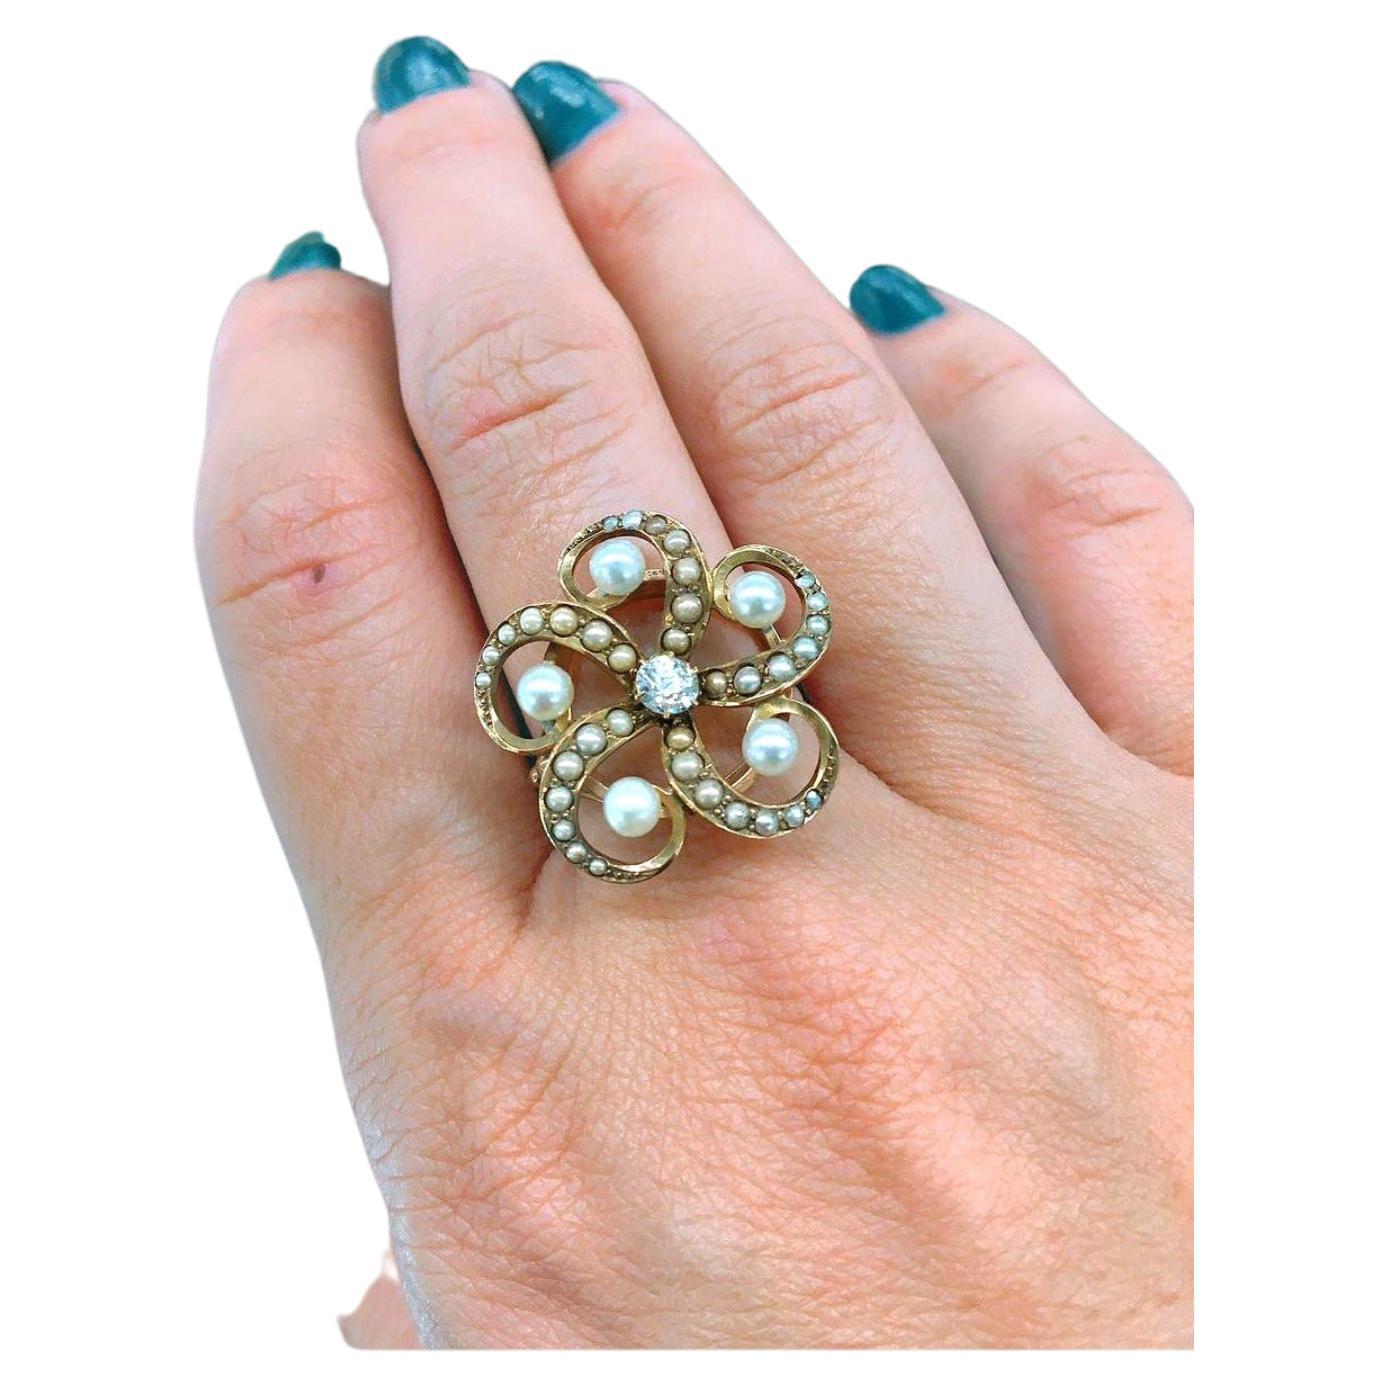 Antique imperial russian era ring in circular designe with white pearls flanked with seed pearls centered with old mine cut diamond estimate weight of 0.30 carart in 14k gold setting hall marked 56 imperial russian gold standard and coucase assay